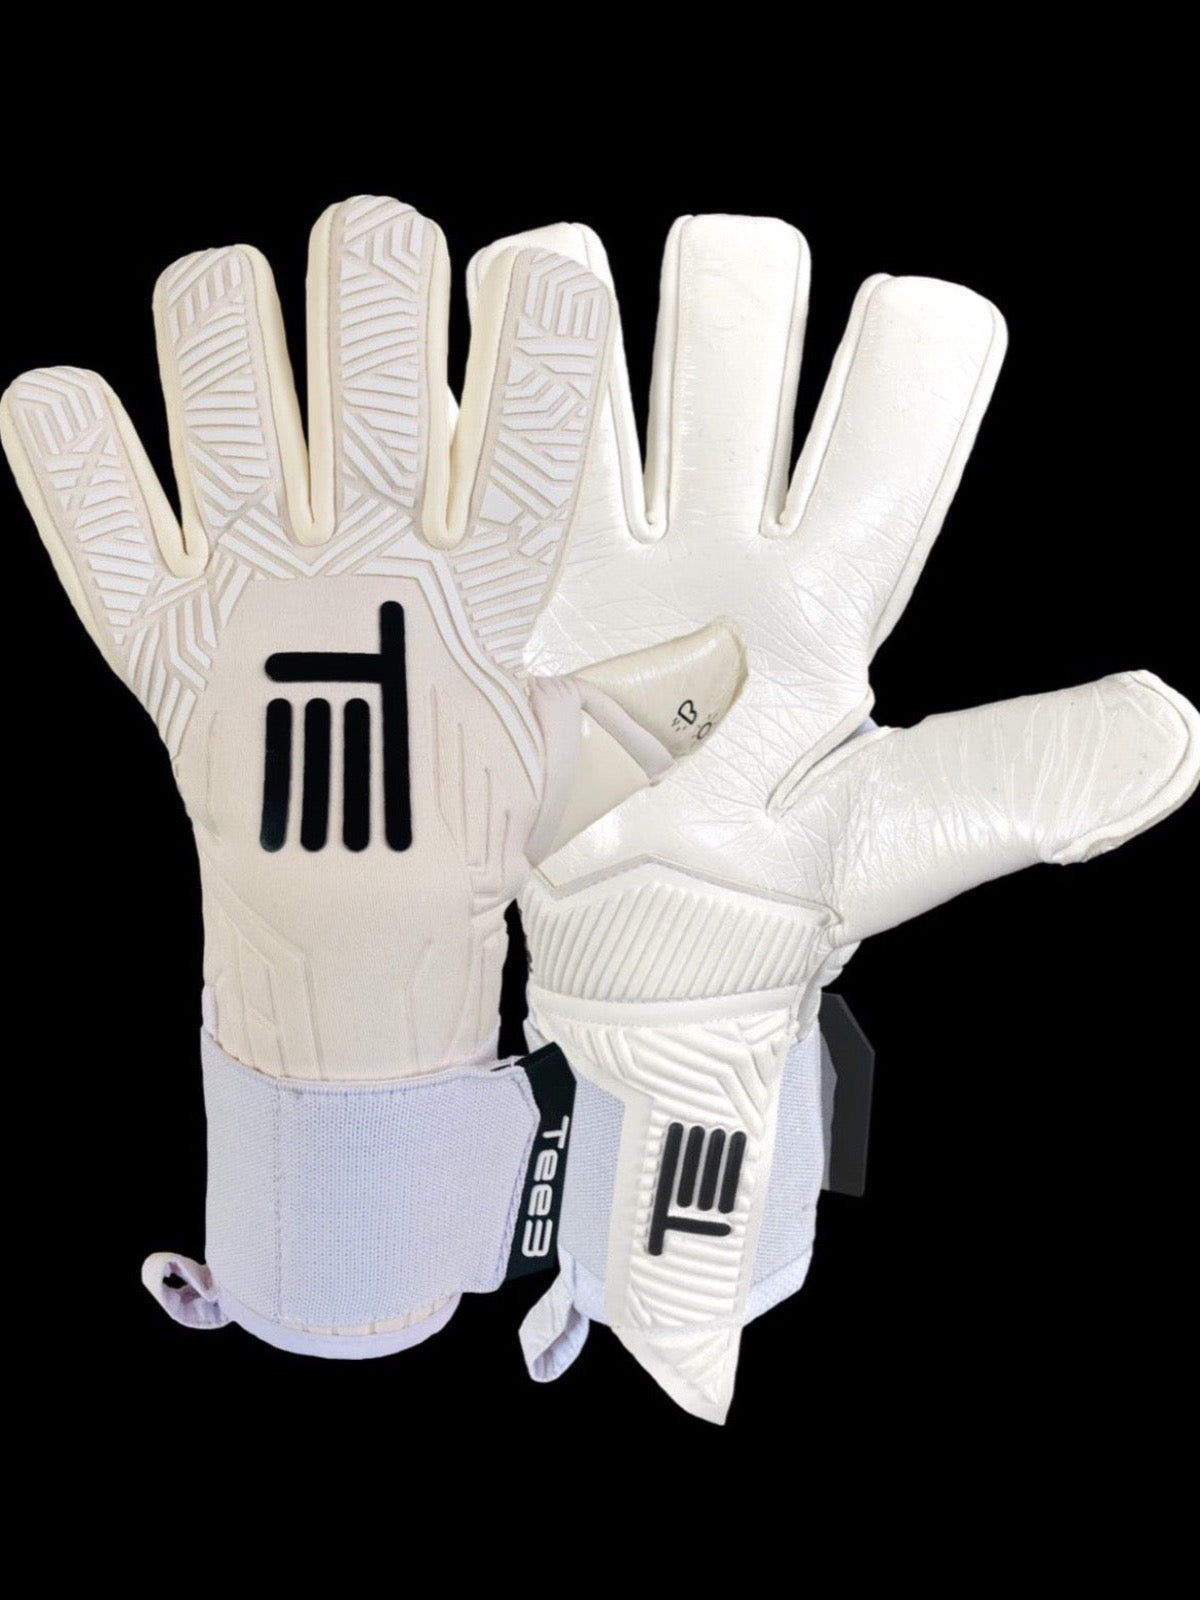 A white negative cut goalkeeper glove with stylish black detail and anti abrasion zone at the heel of the the day palm